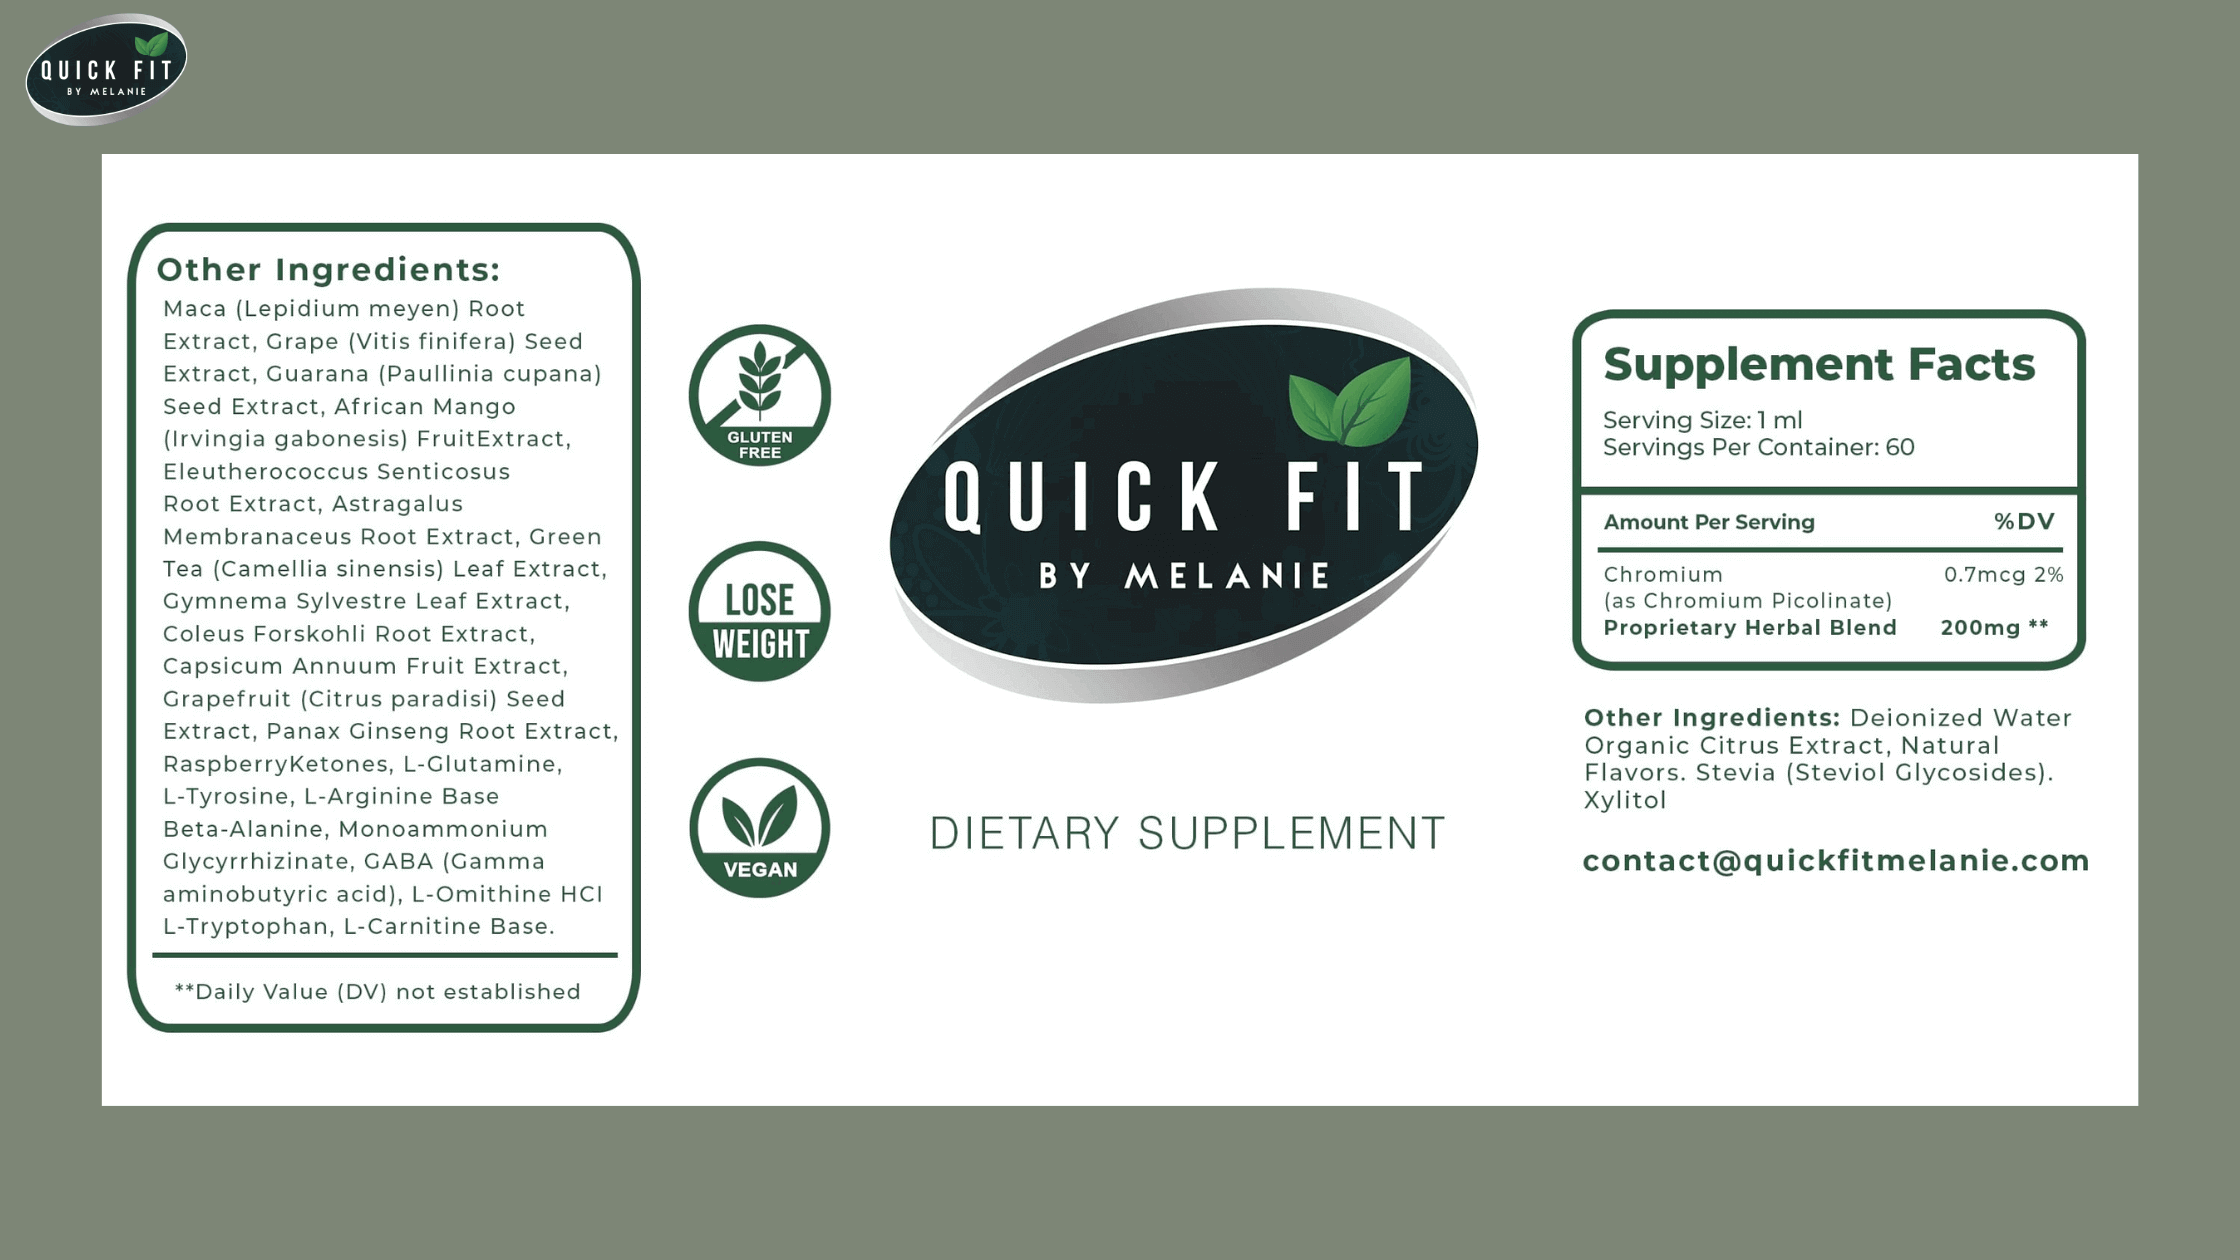 Quick Fit By Melanie supplement facts